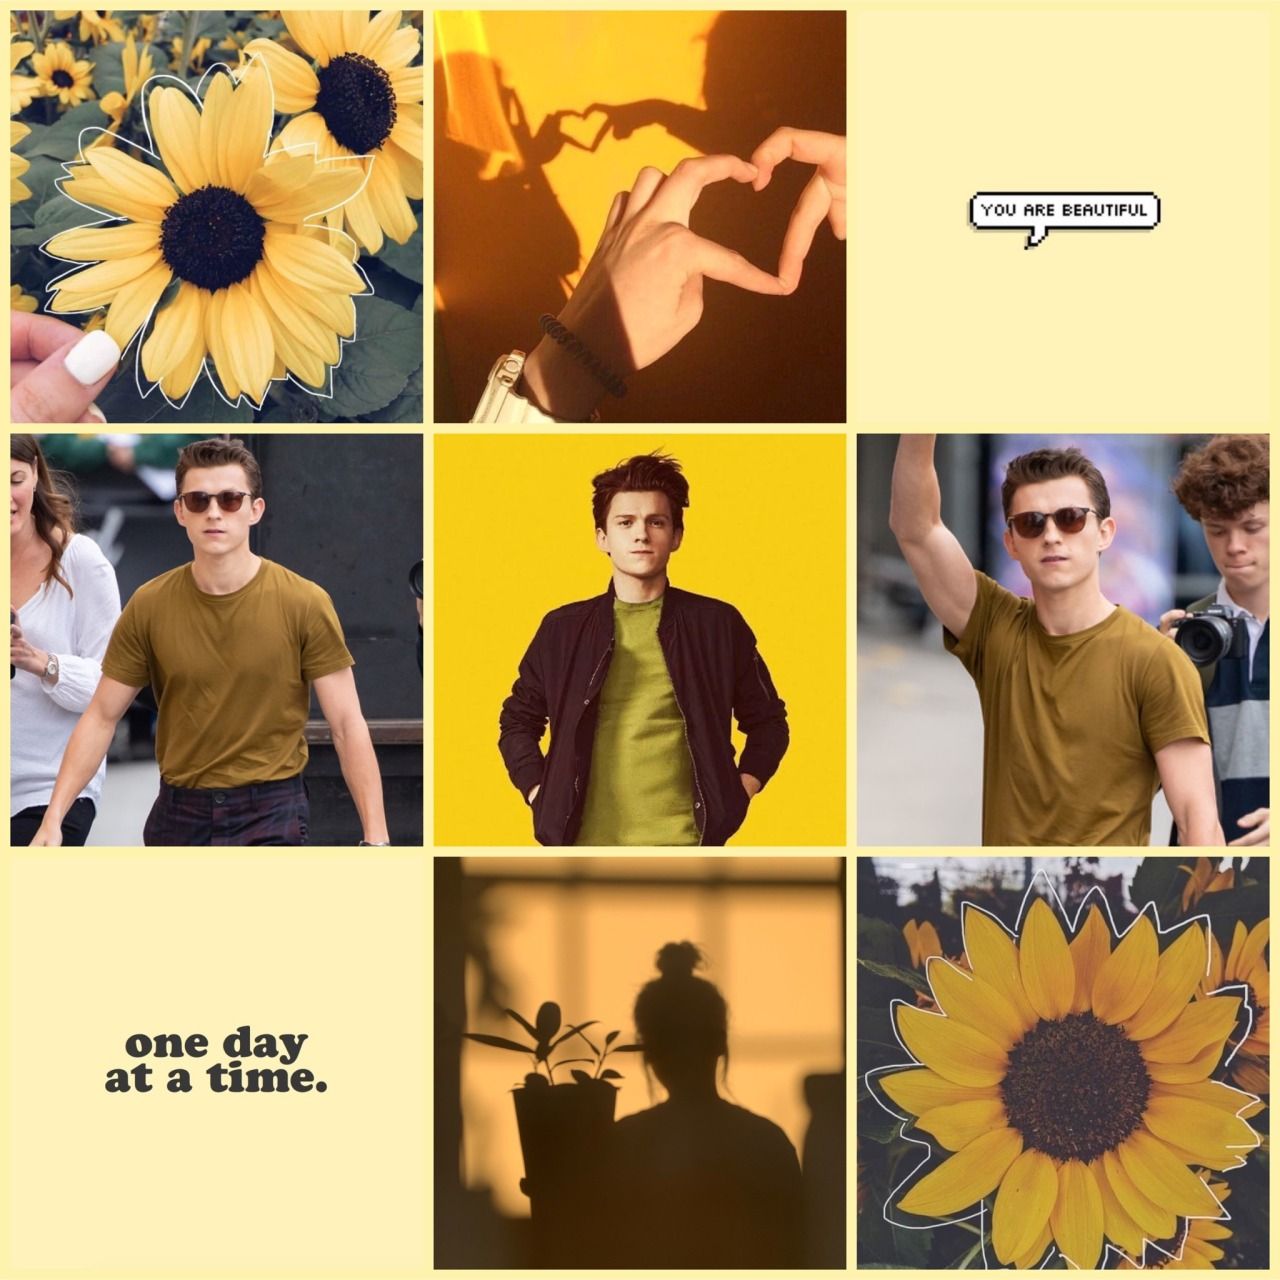 Tom Holland in a yellow shirt surrounded by sunflowers - Tom Holland